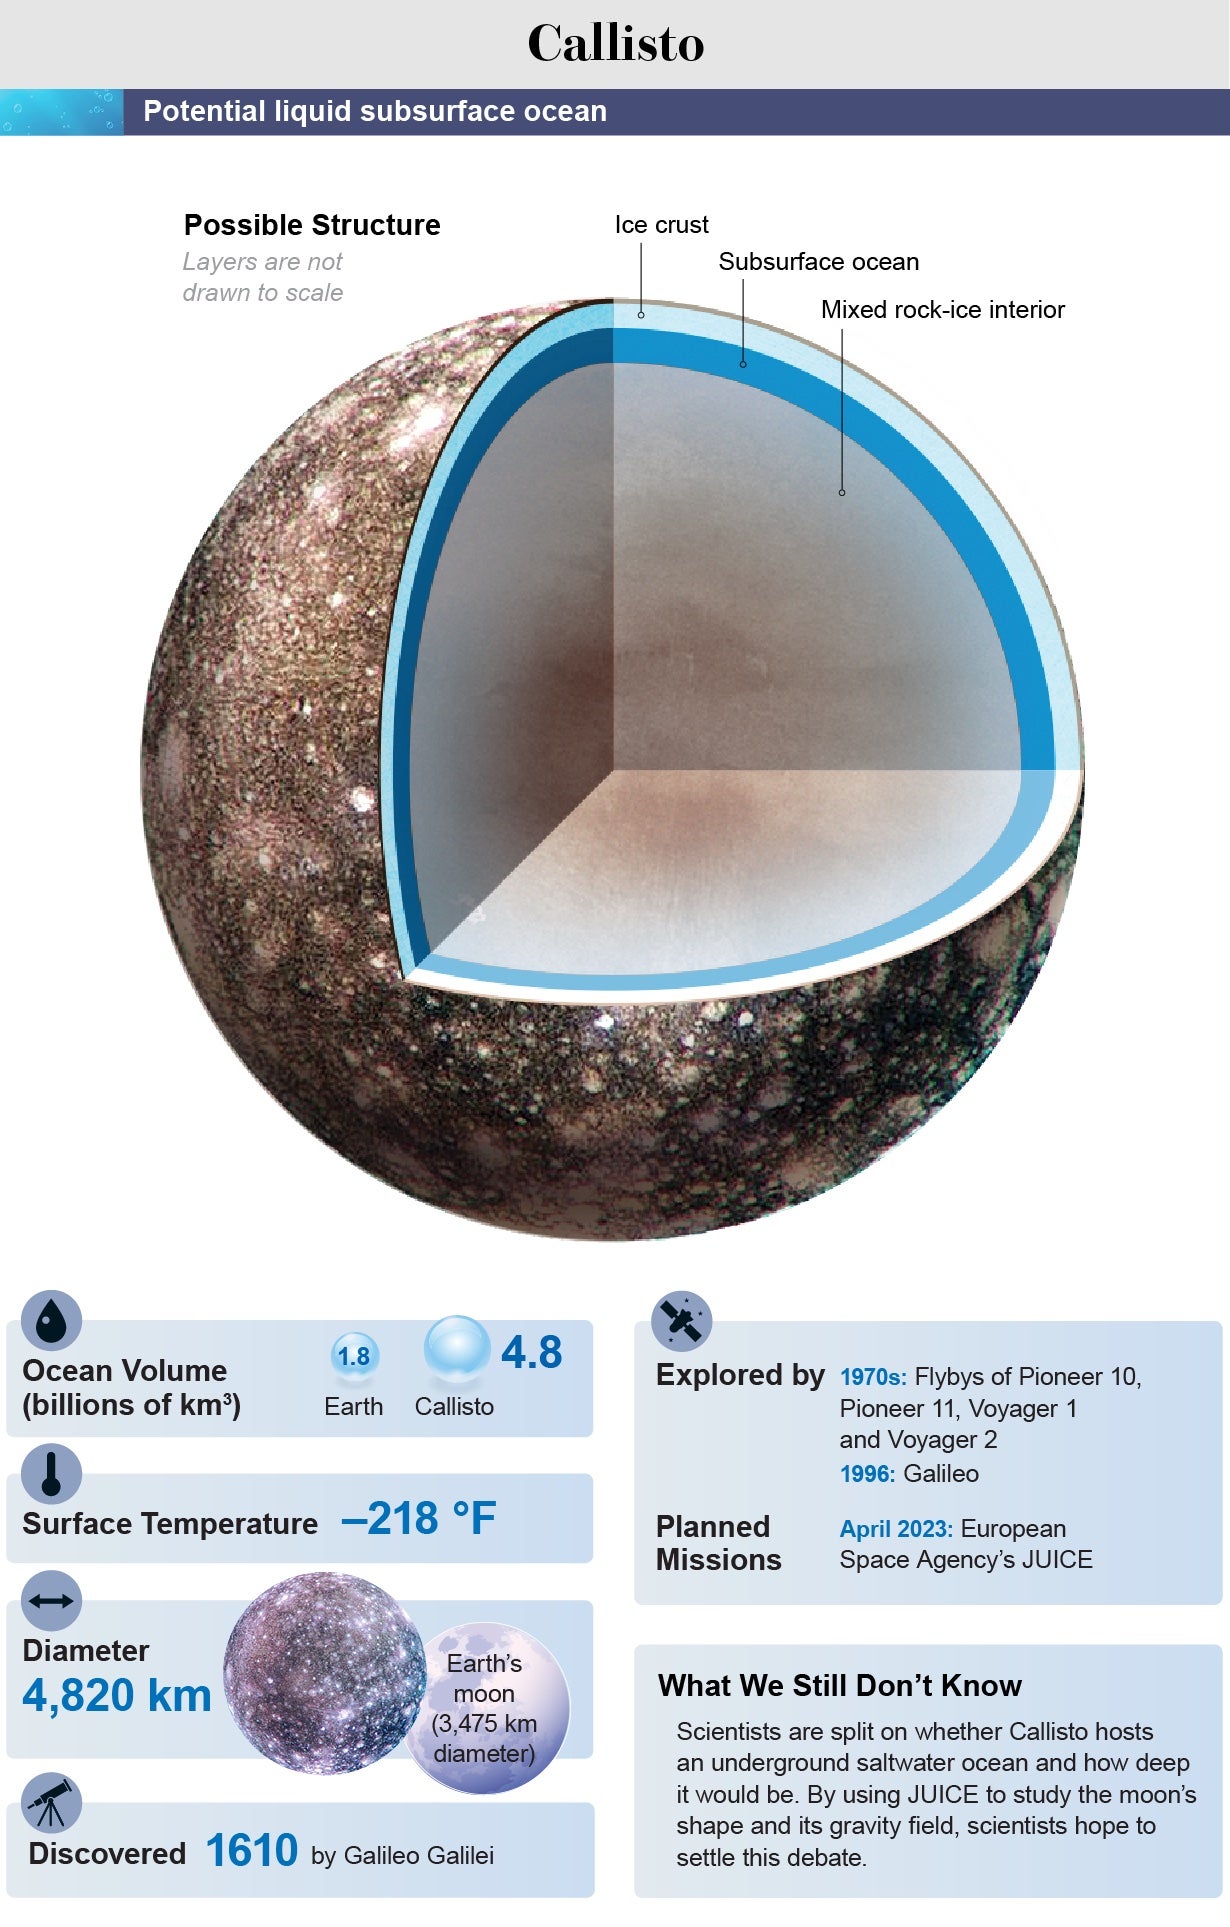 View inside Callisto—showing a mixed rock-ice interior, subsurface ocean and ice crust—paired with moon statistics.